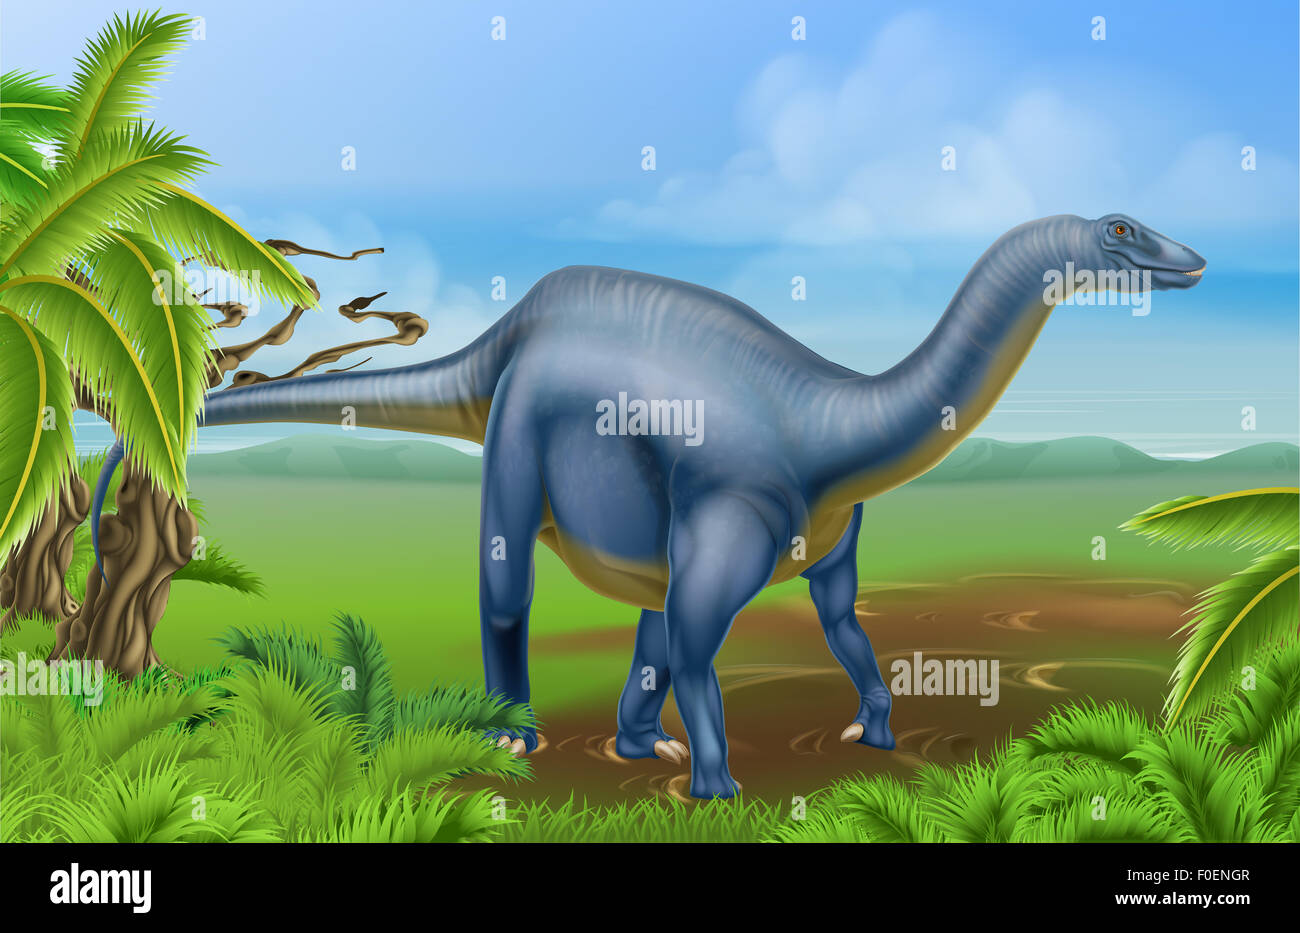 An illustration of a Diplodocus dinosaur from the sauropod family like brachiosaurus and other long neck dinosaurs in a backgrou Stock Photo